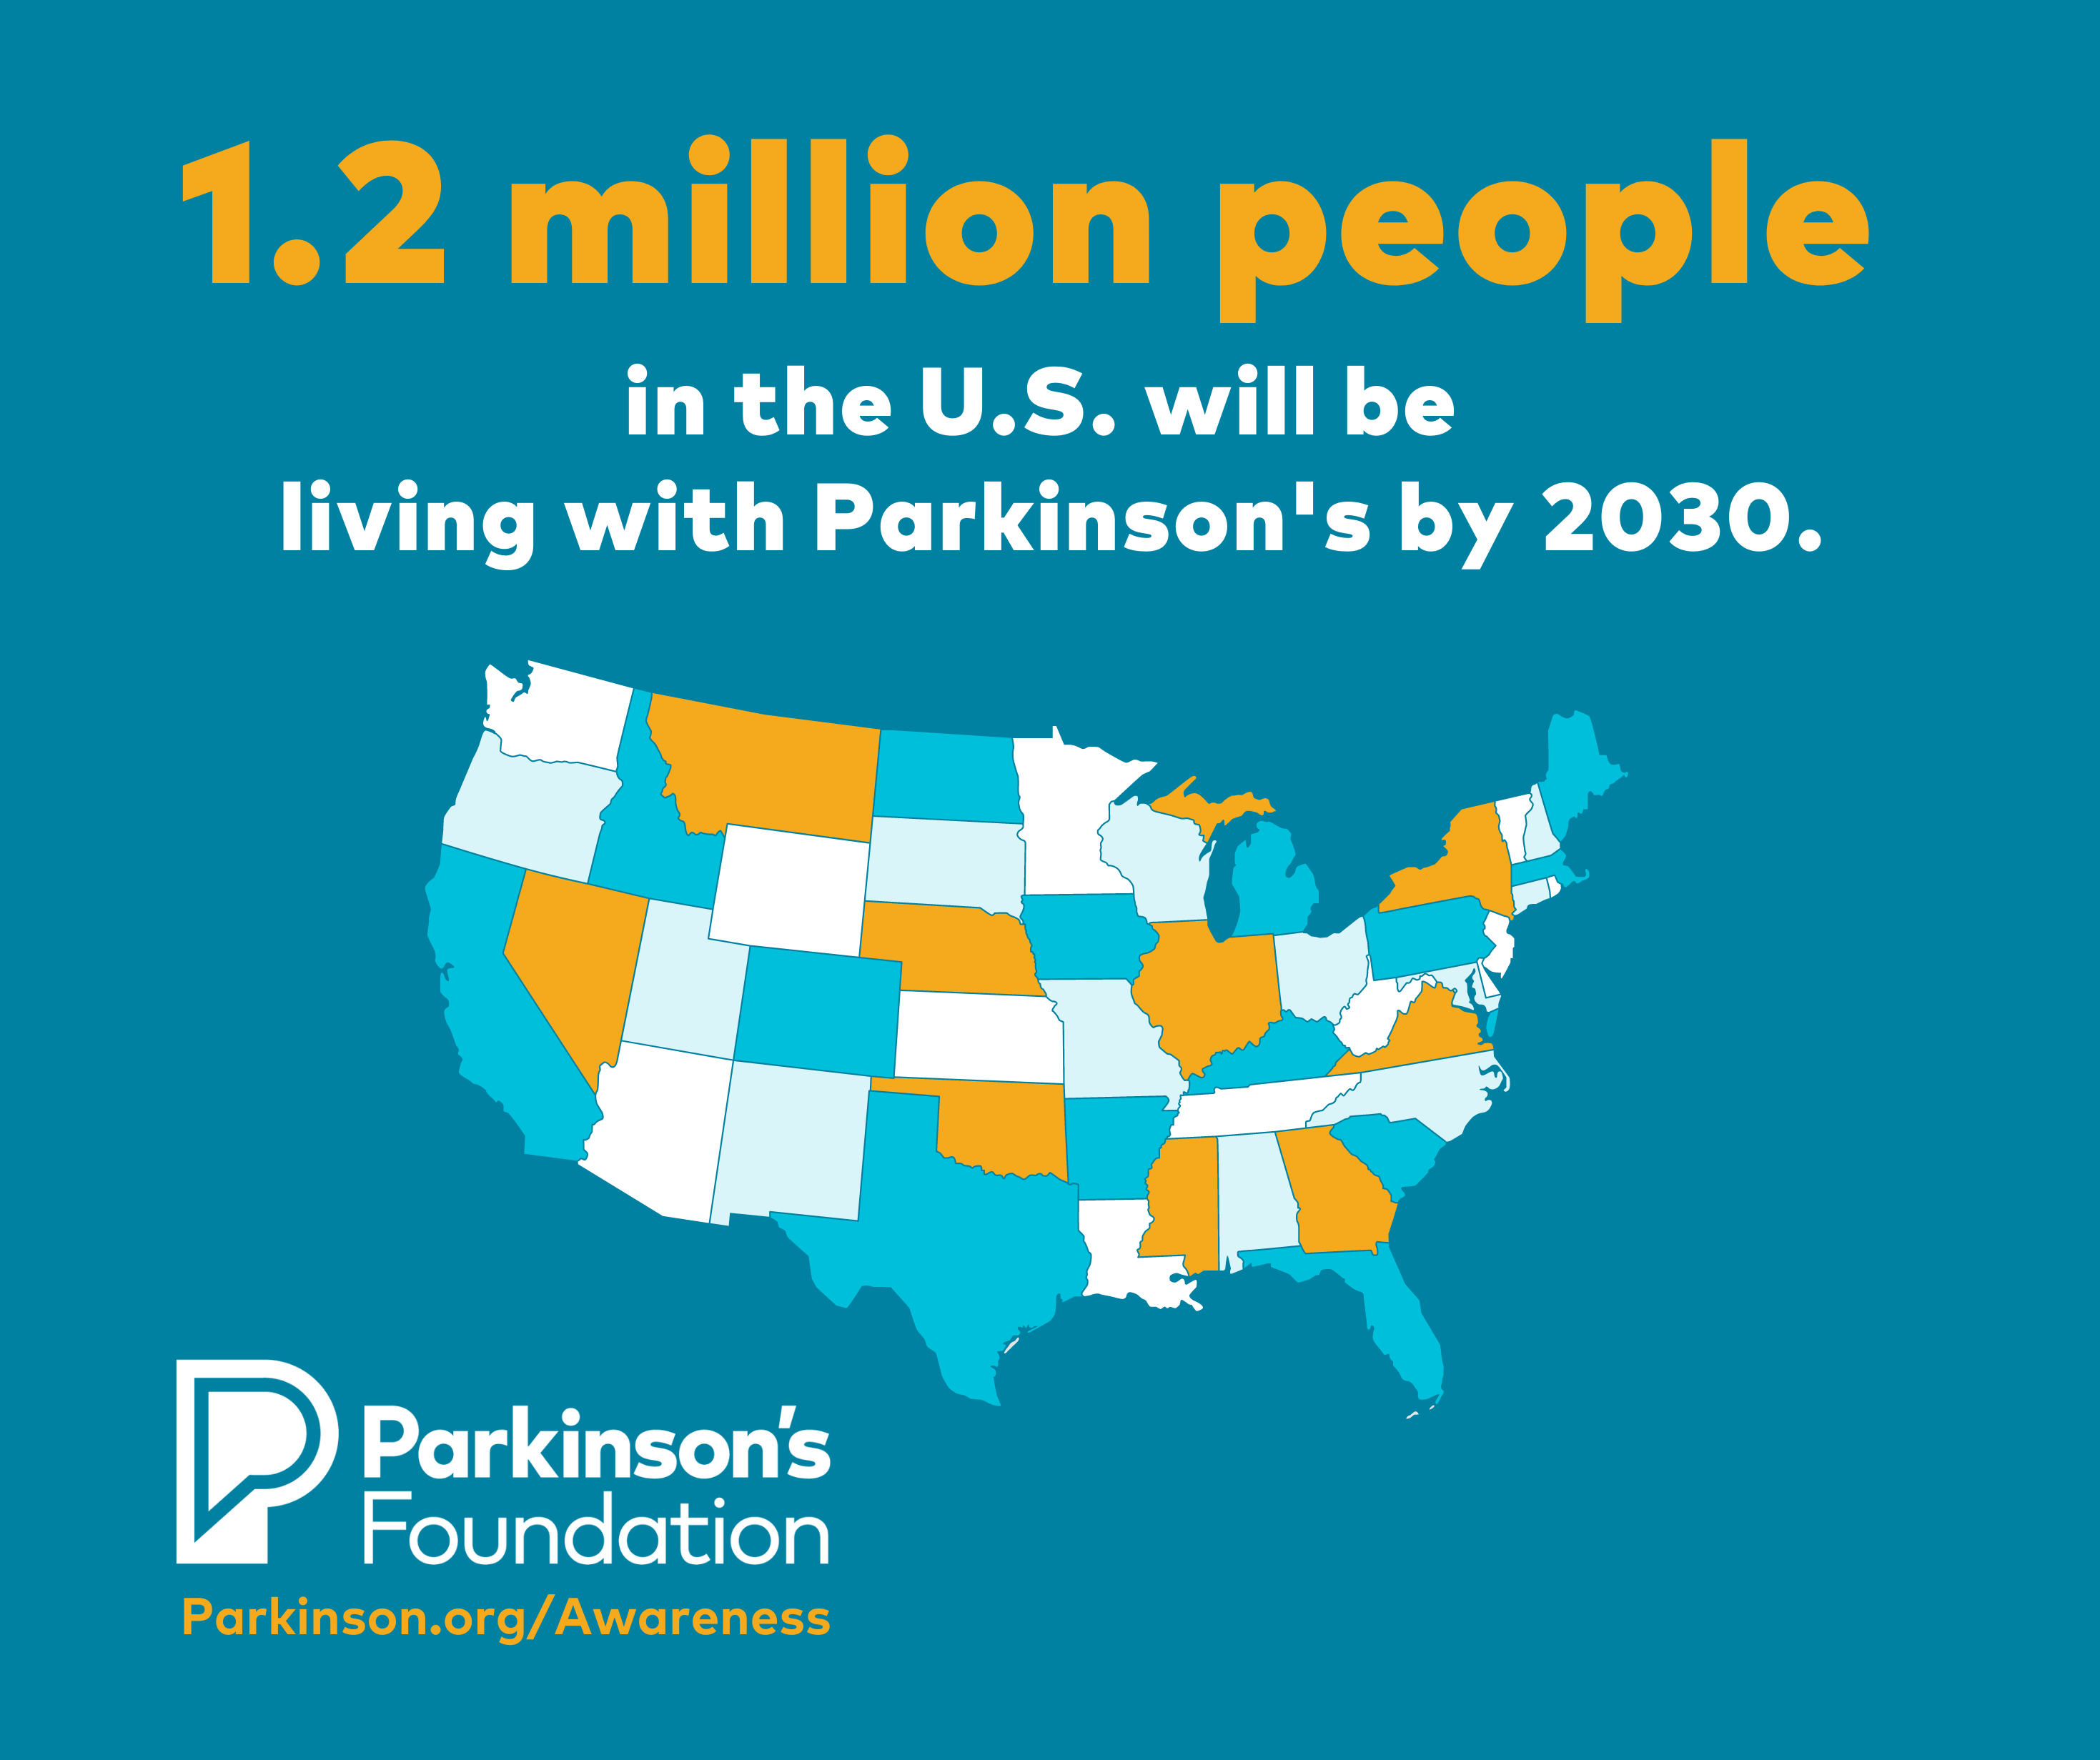 According to the Parkinson’s Foundation, 1.2 million people in the U.S. will be living with Parkinson’s disease by 2030.